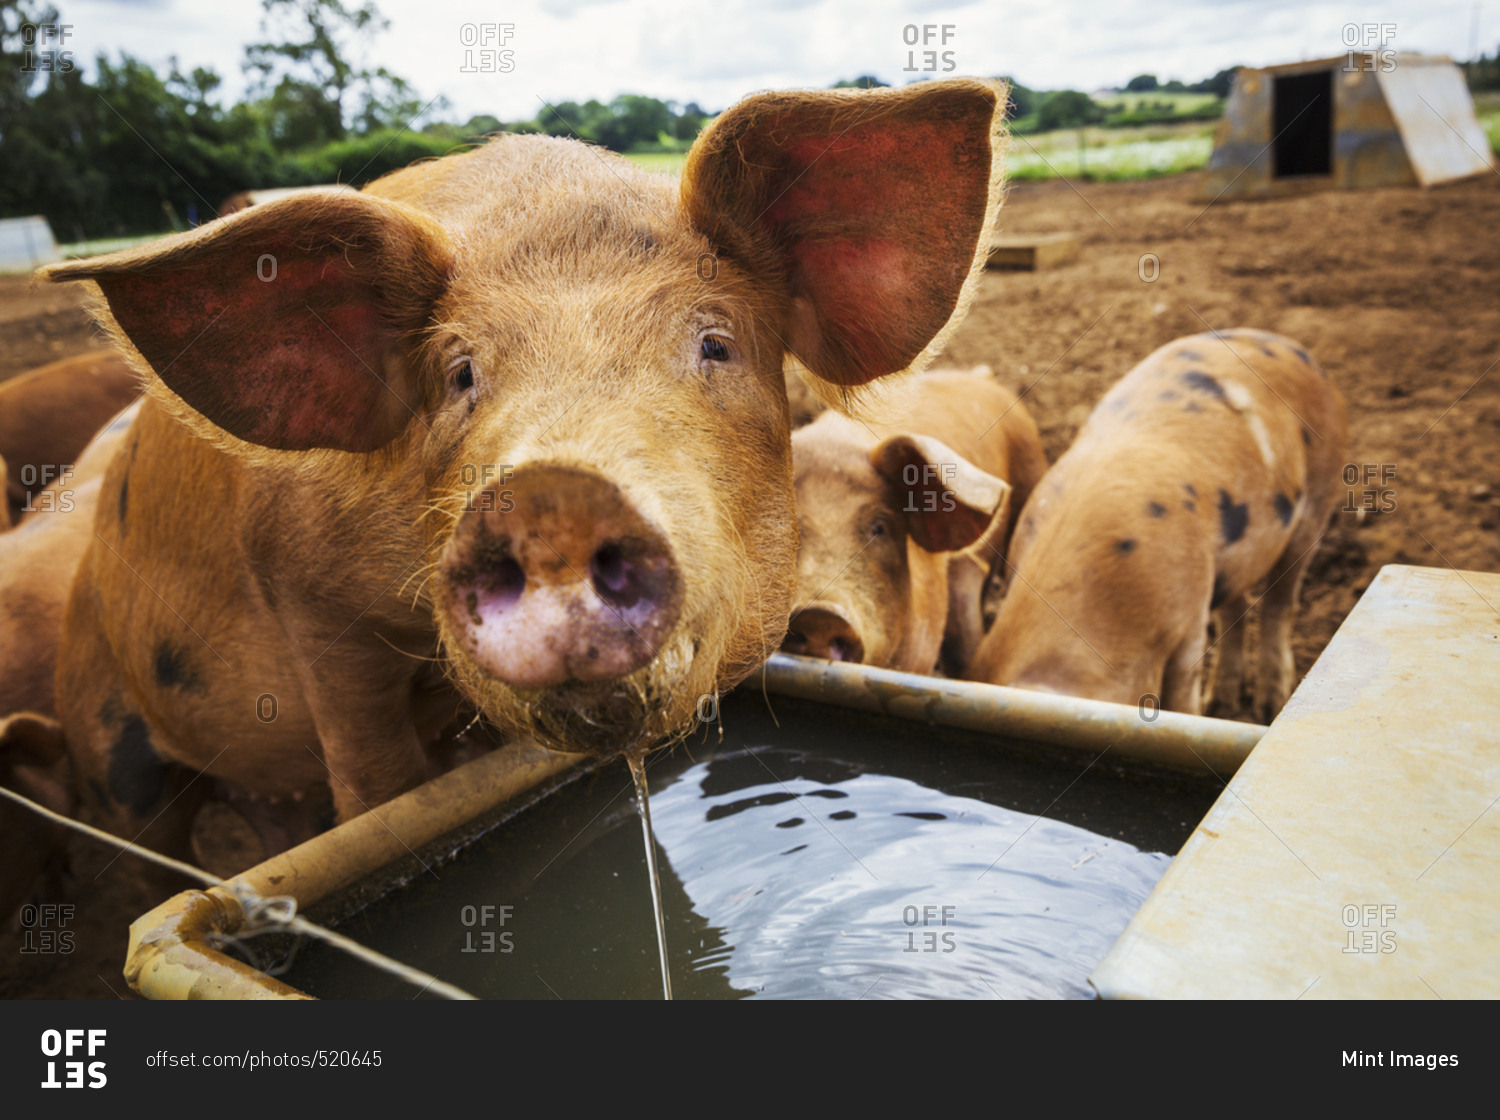 Three pigs in a field, one drinking from a trough.